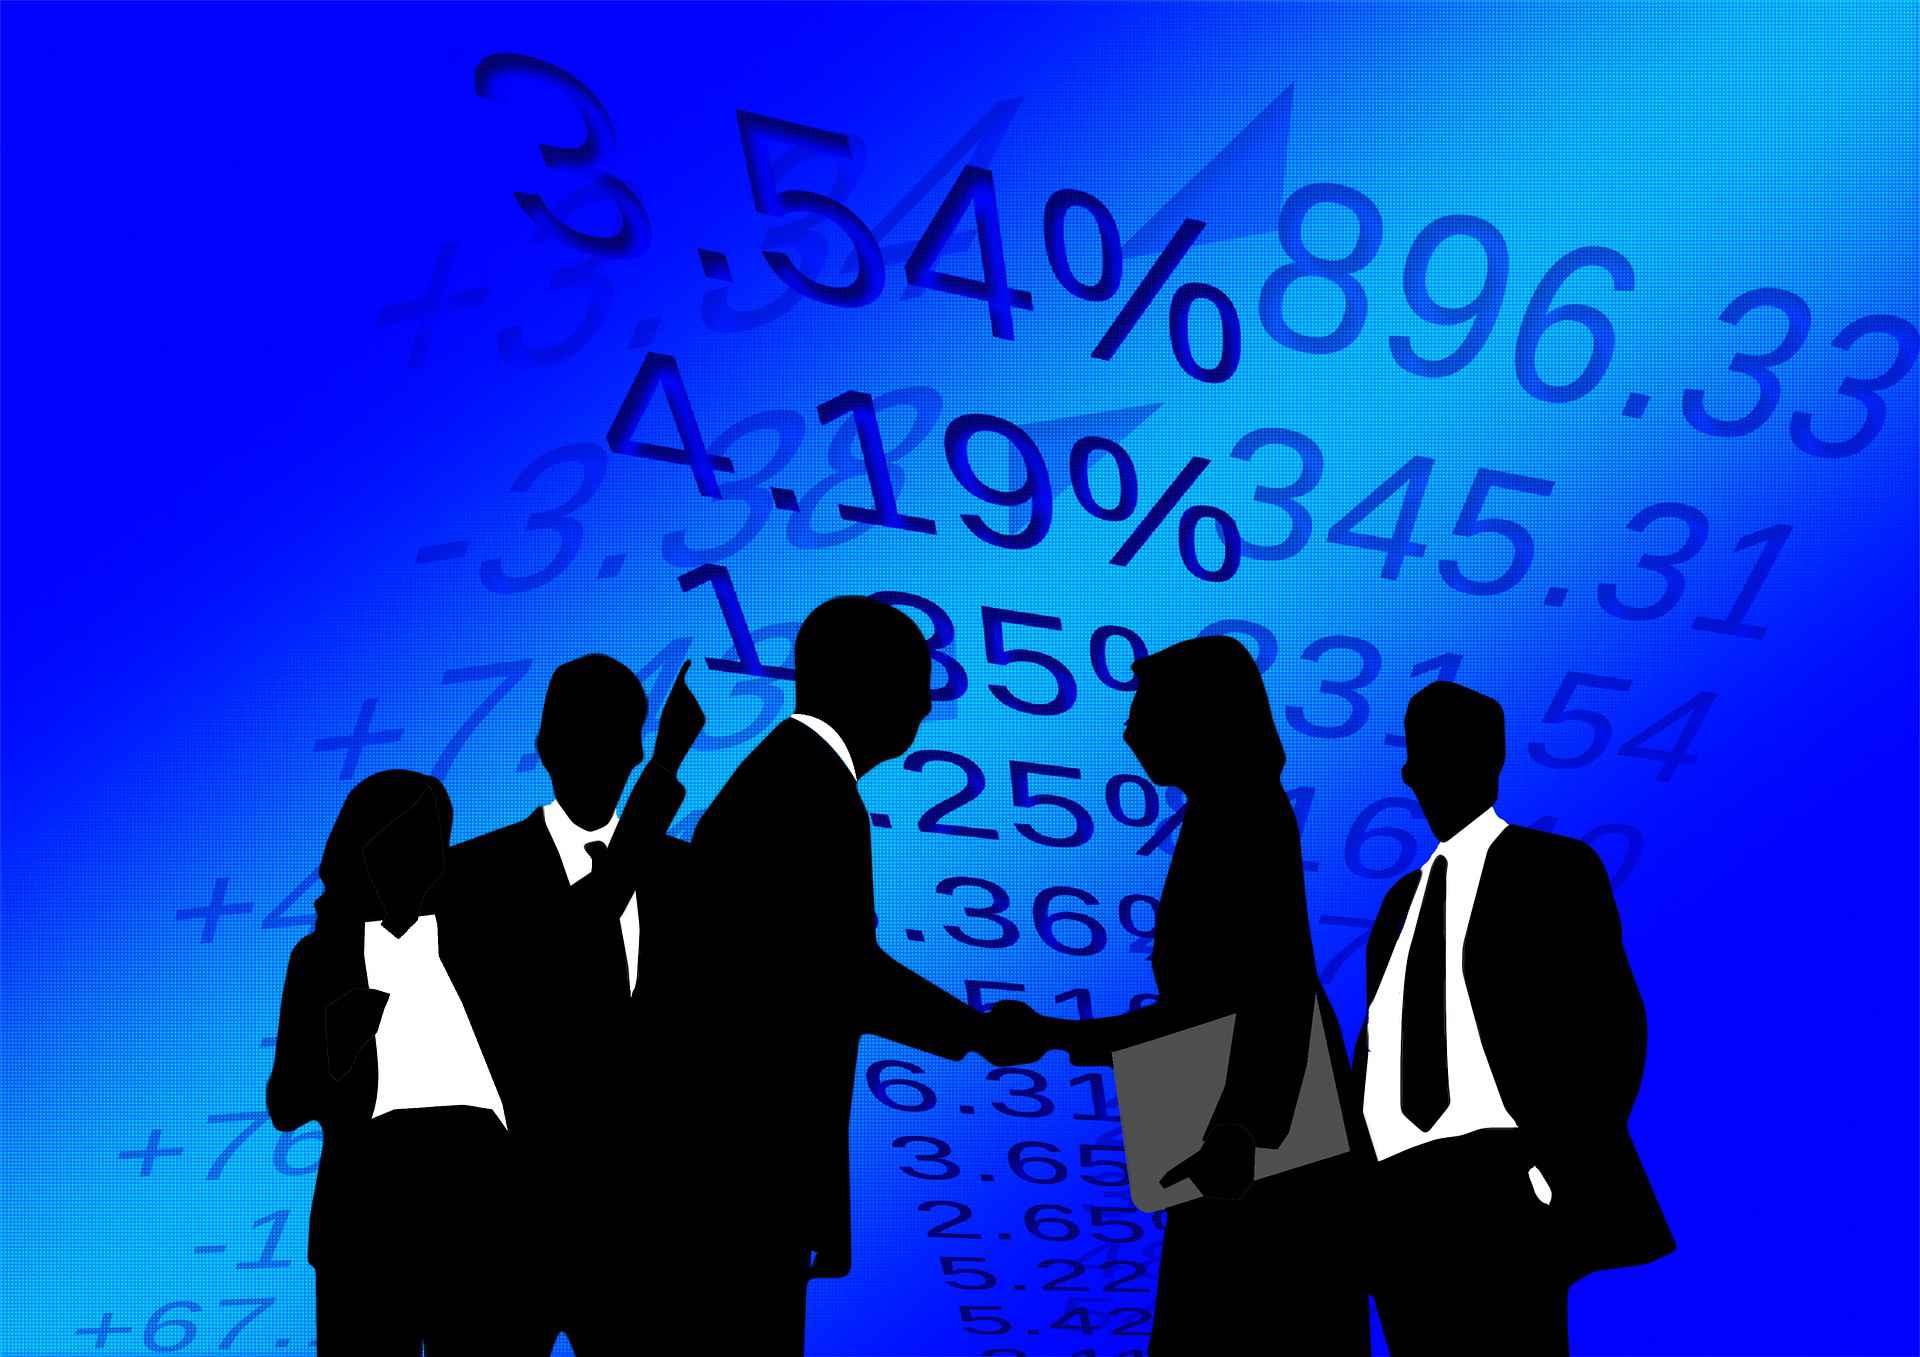 a blue graphic of a group of financial planners wearing suits shaking hands with percentage numbers in the background representing the Certified Financial Planner Requirements